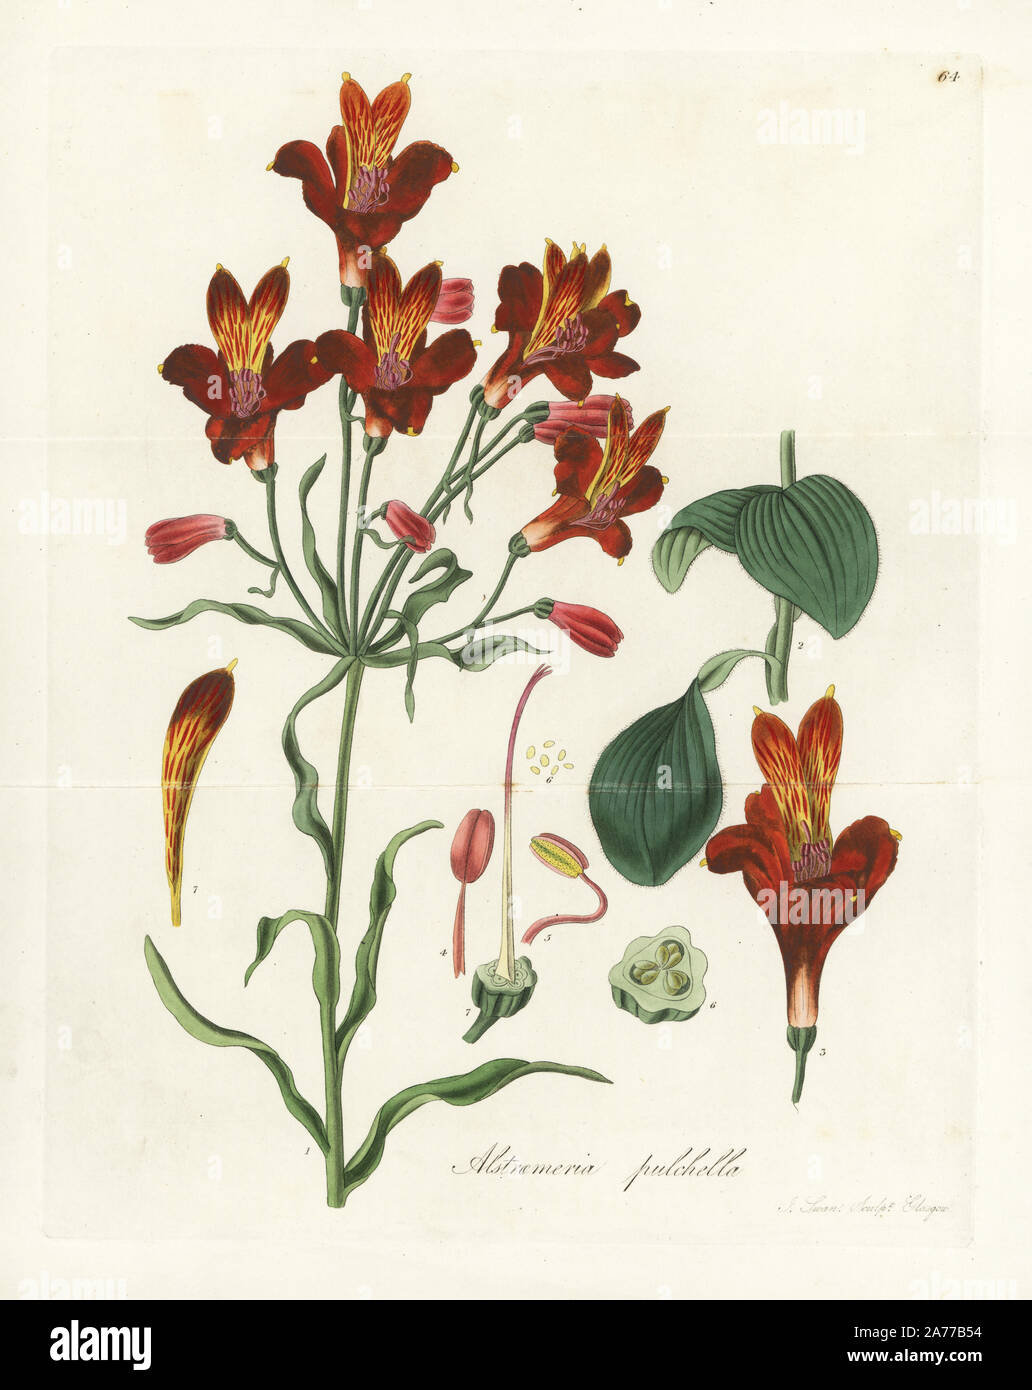 Parrot lily or red speckled-flowered alstroemeria, Alstroemeria